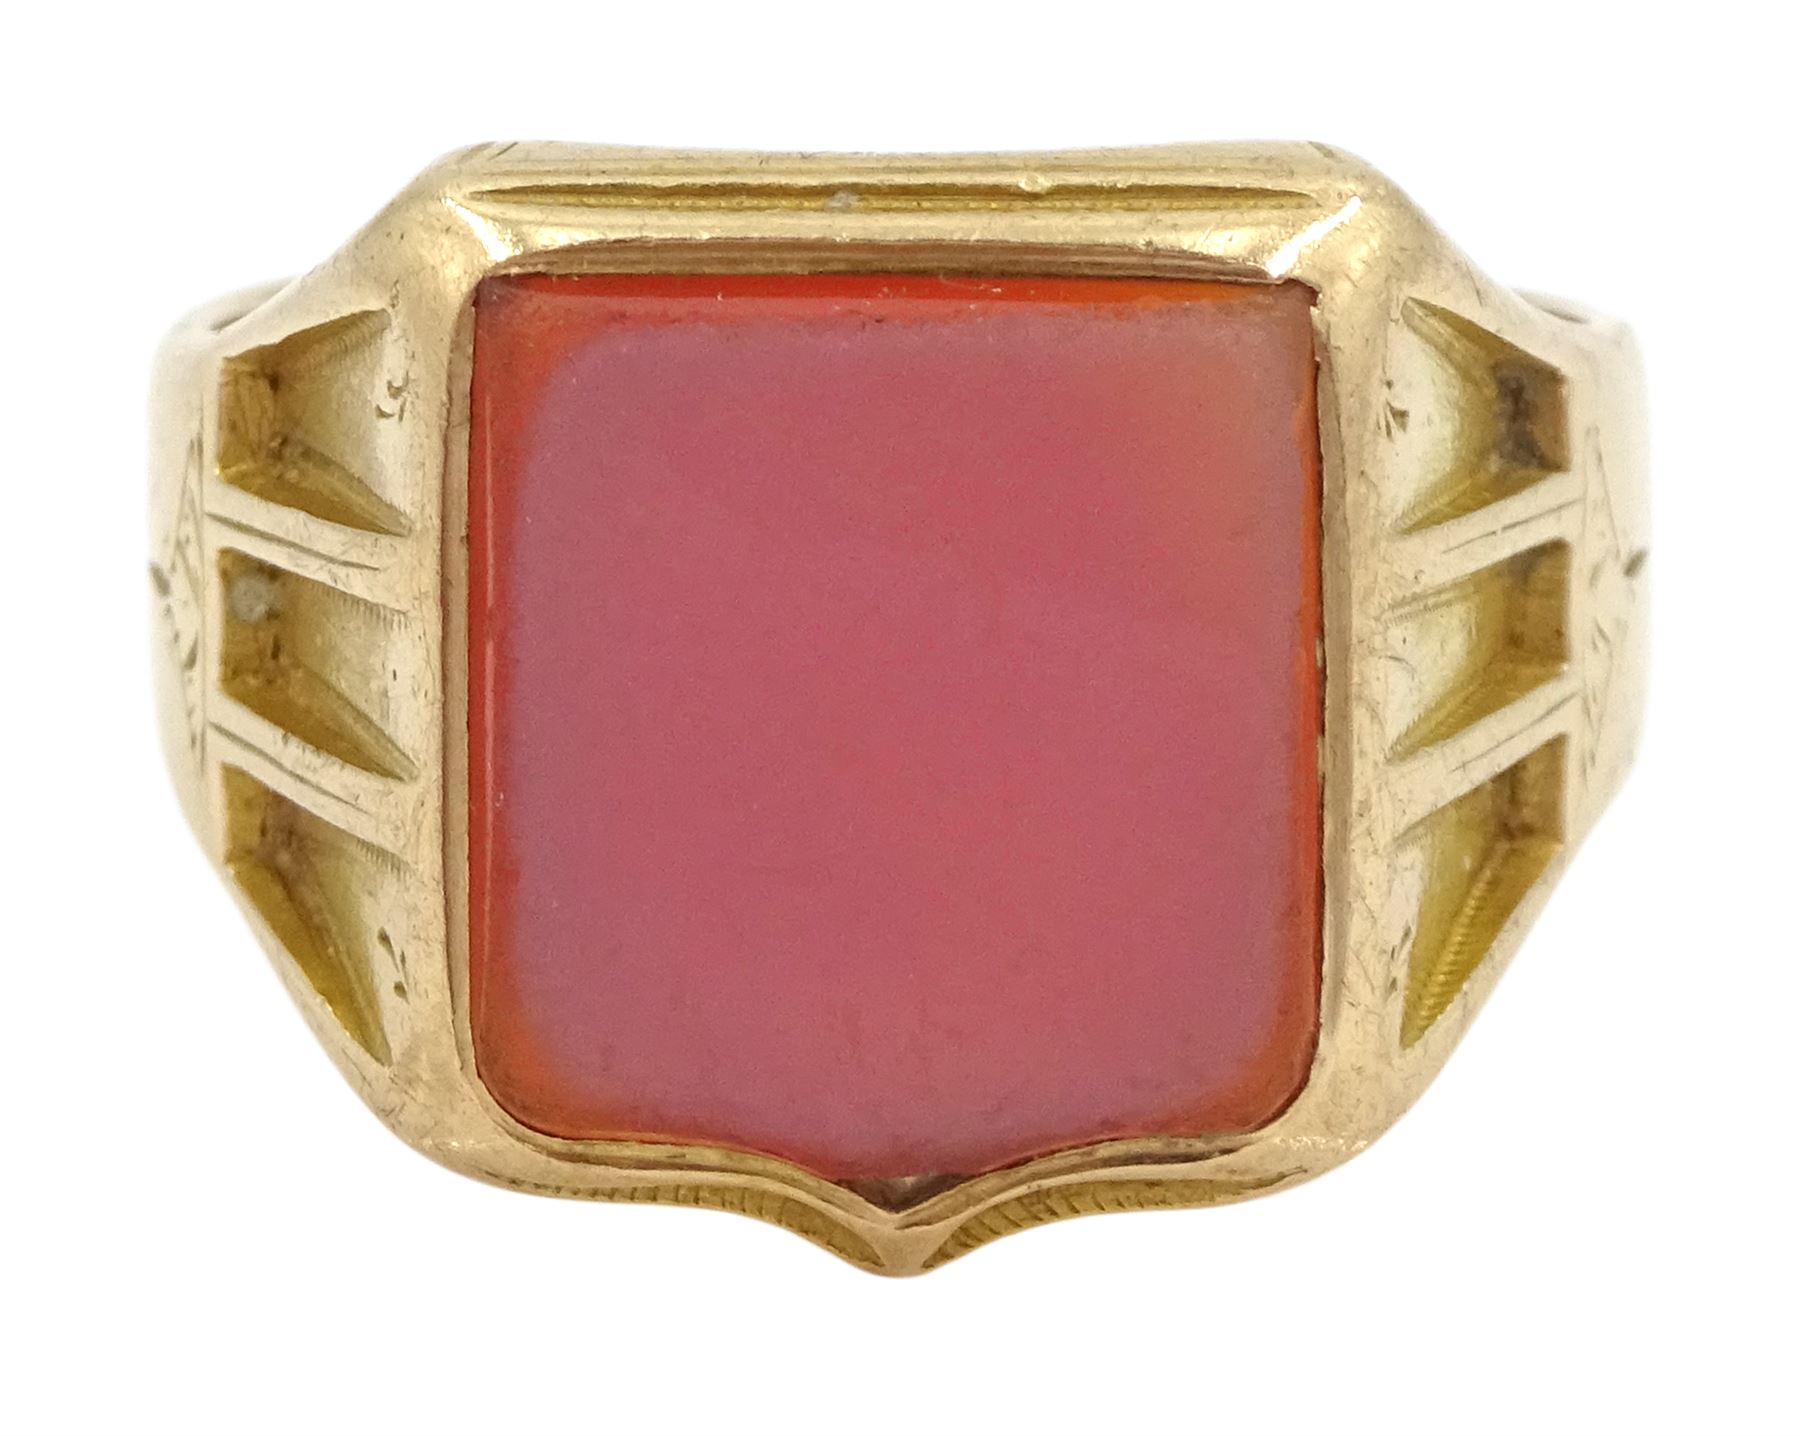 Early 20th century 15ct gold agate shield signet ring